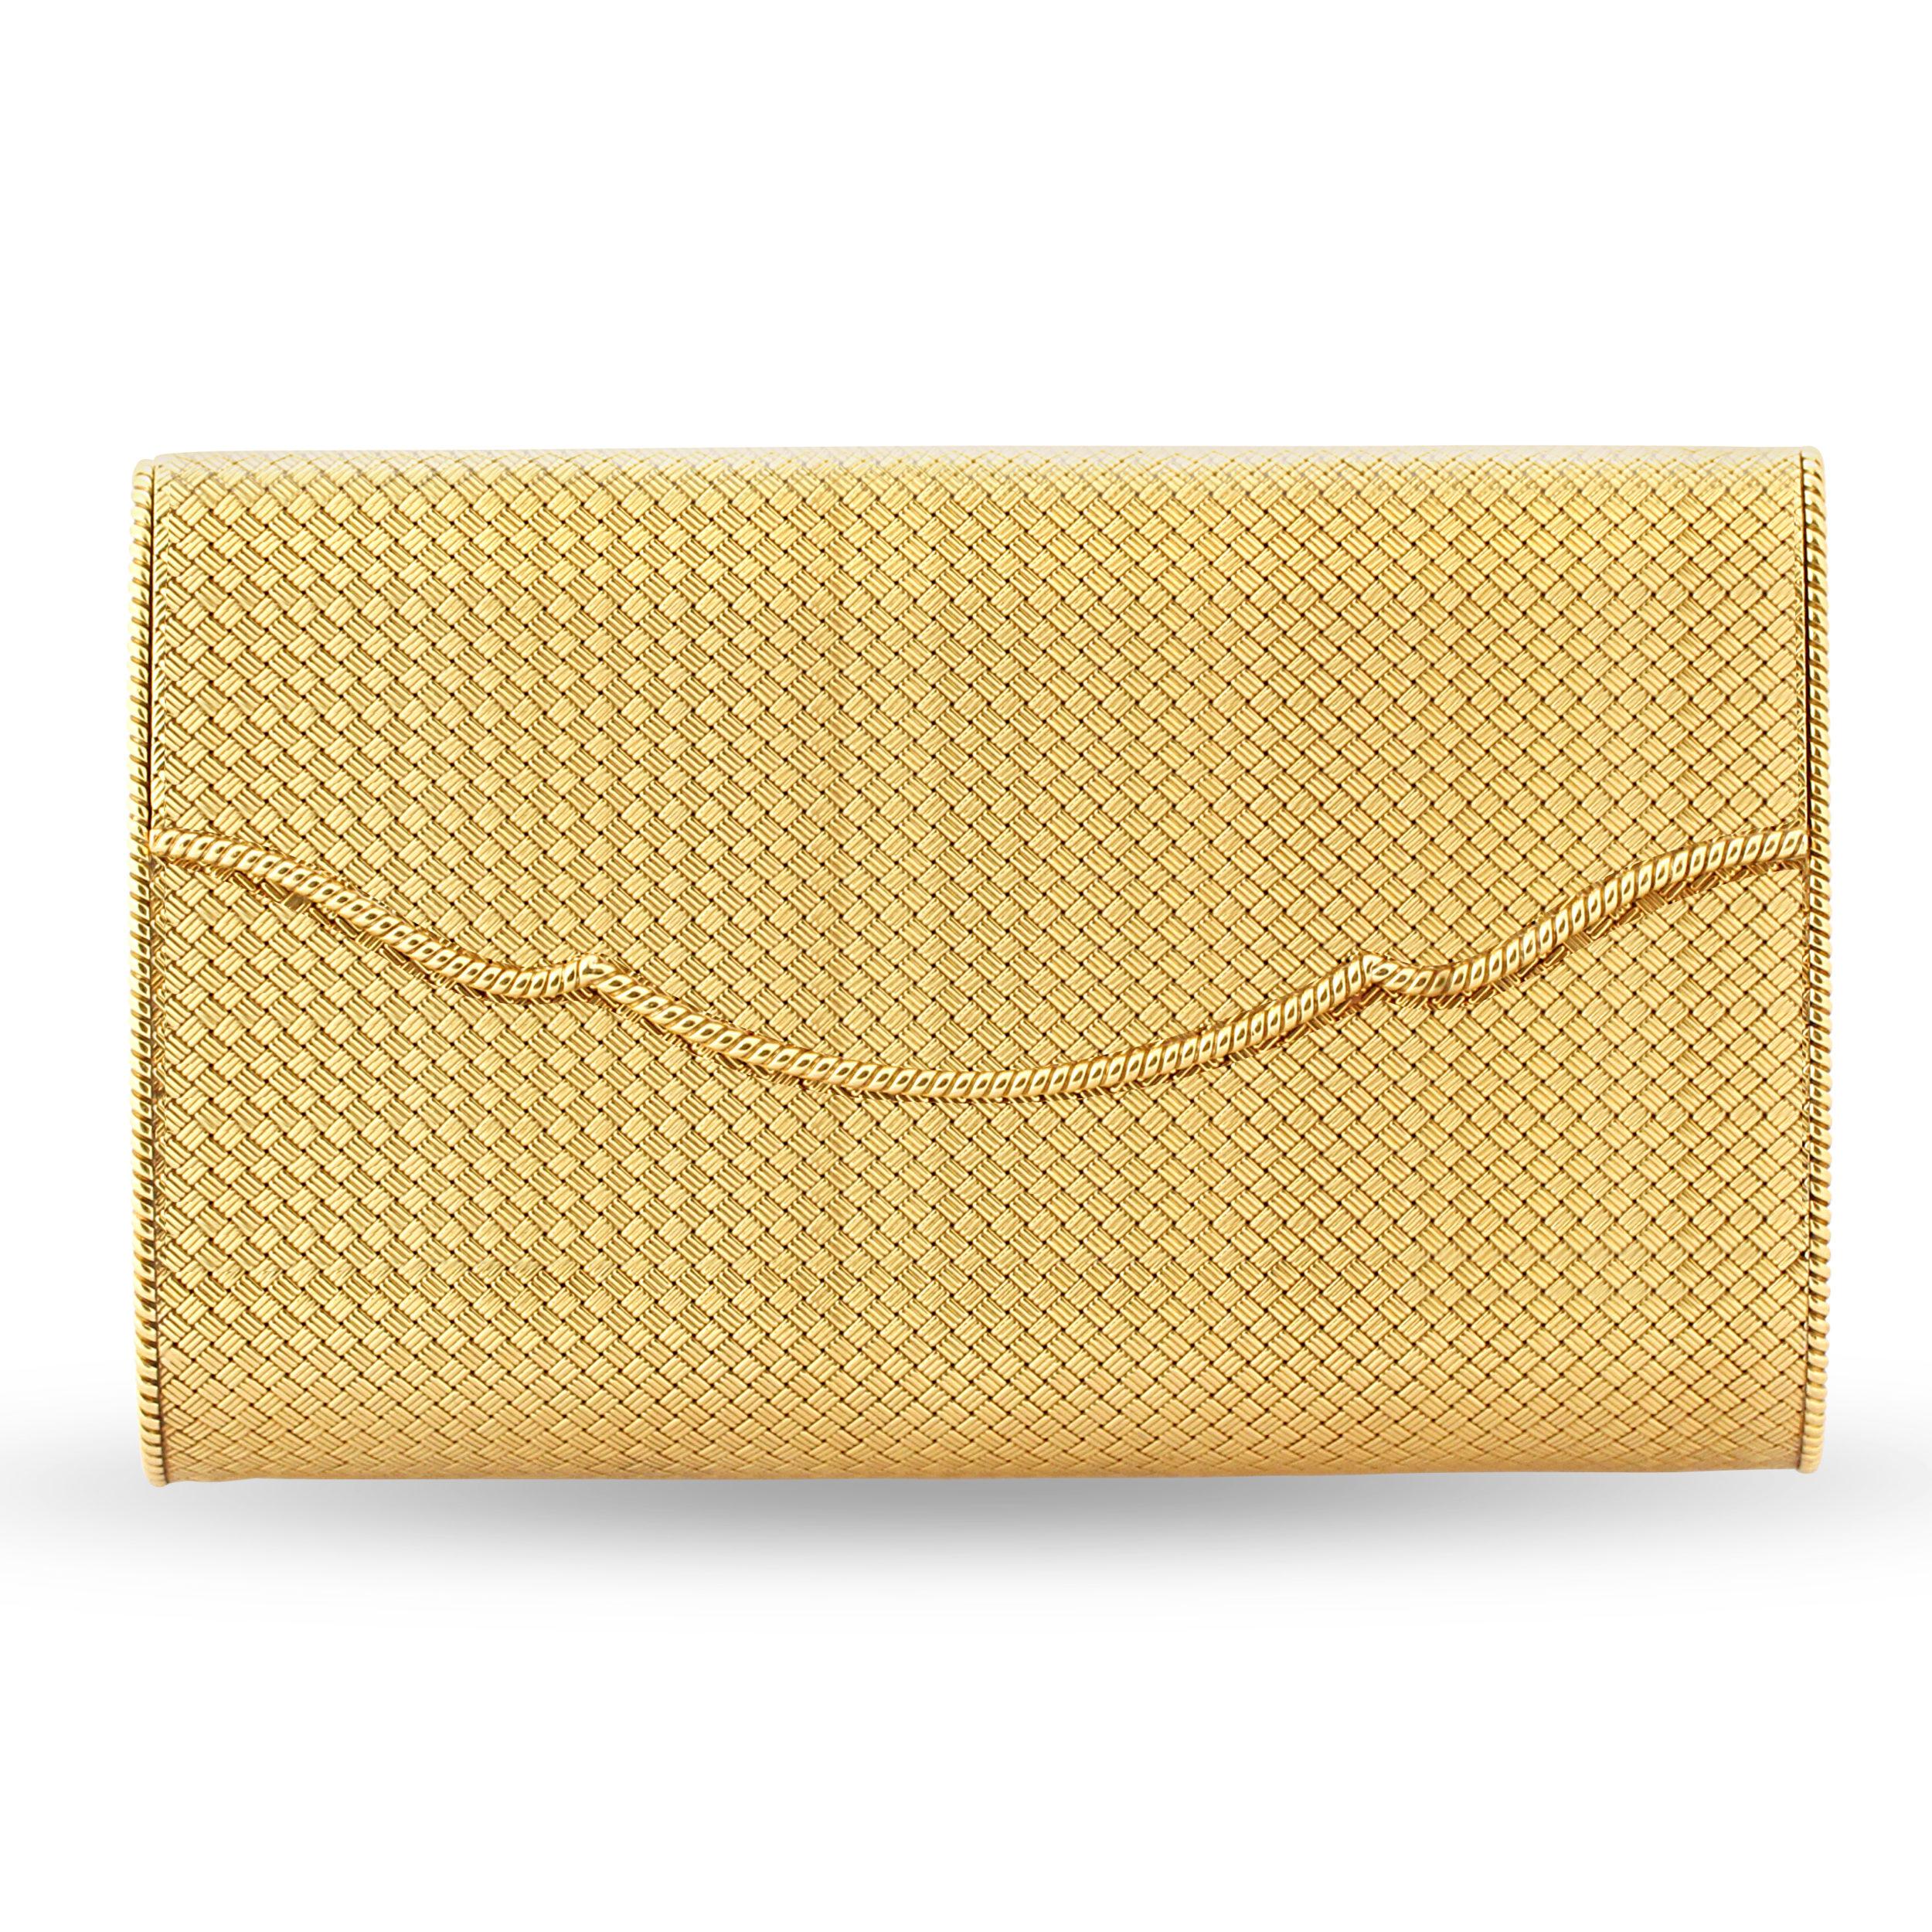 An 18k yellow gold ladies evening bag by Cartier. A beautiful handheld clutch, spacious enough to hold your valuables. The inside is lined in brown suede with a mirror on the cover flap. Circa 1950s. Weight = 550gr. Dimensions: 16.5cm x 10cm x 5cm